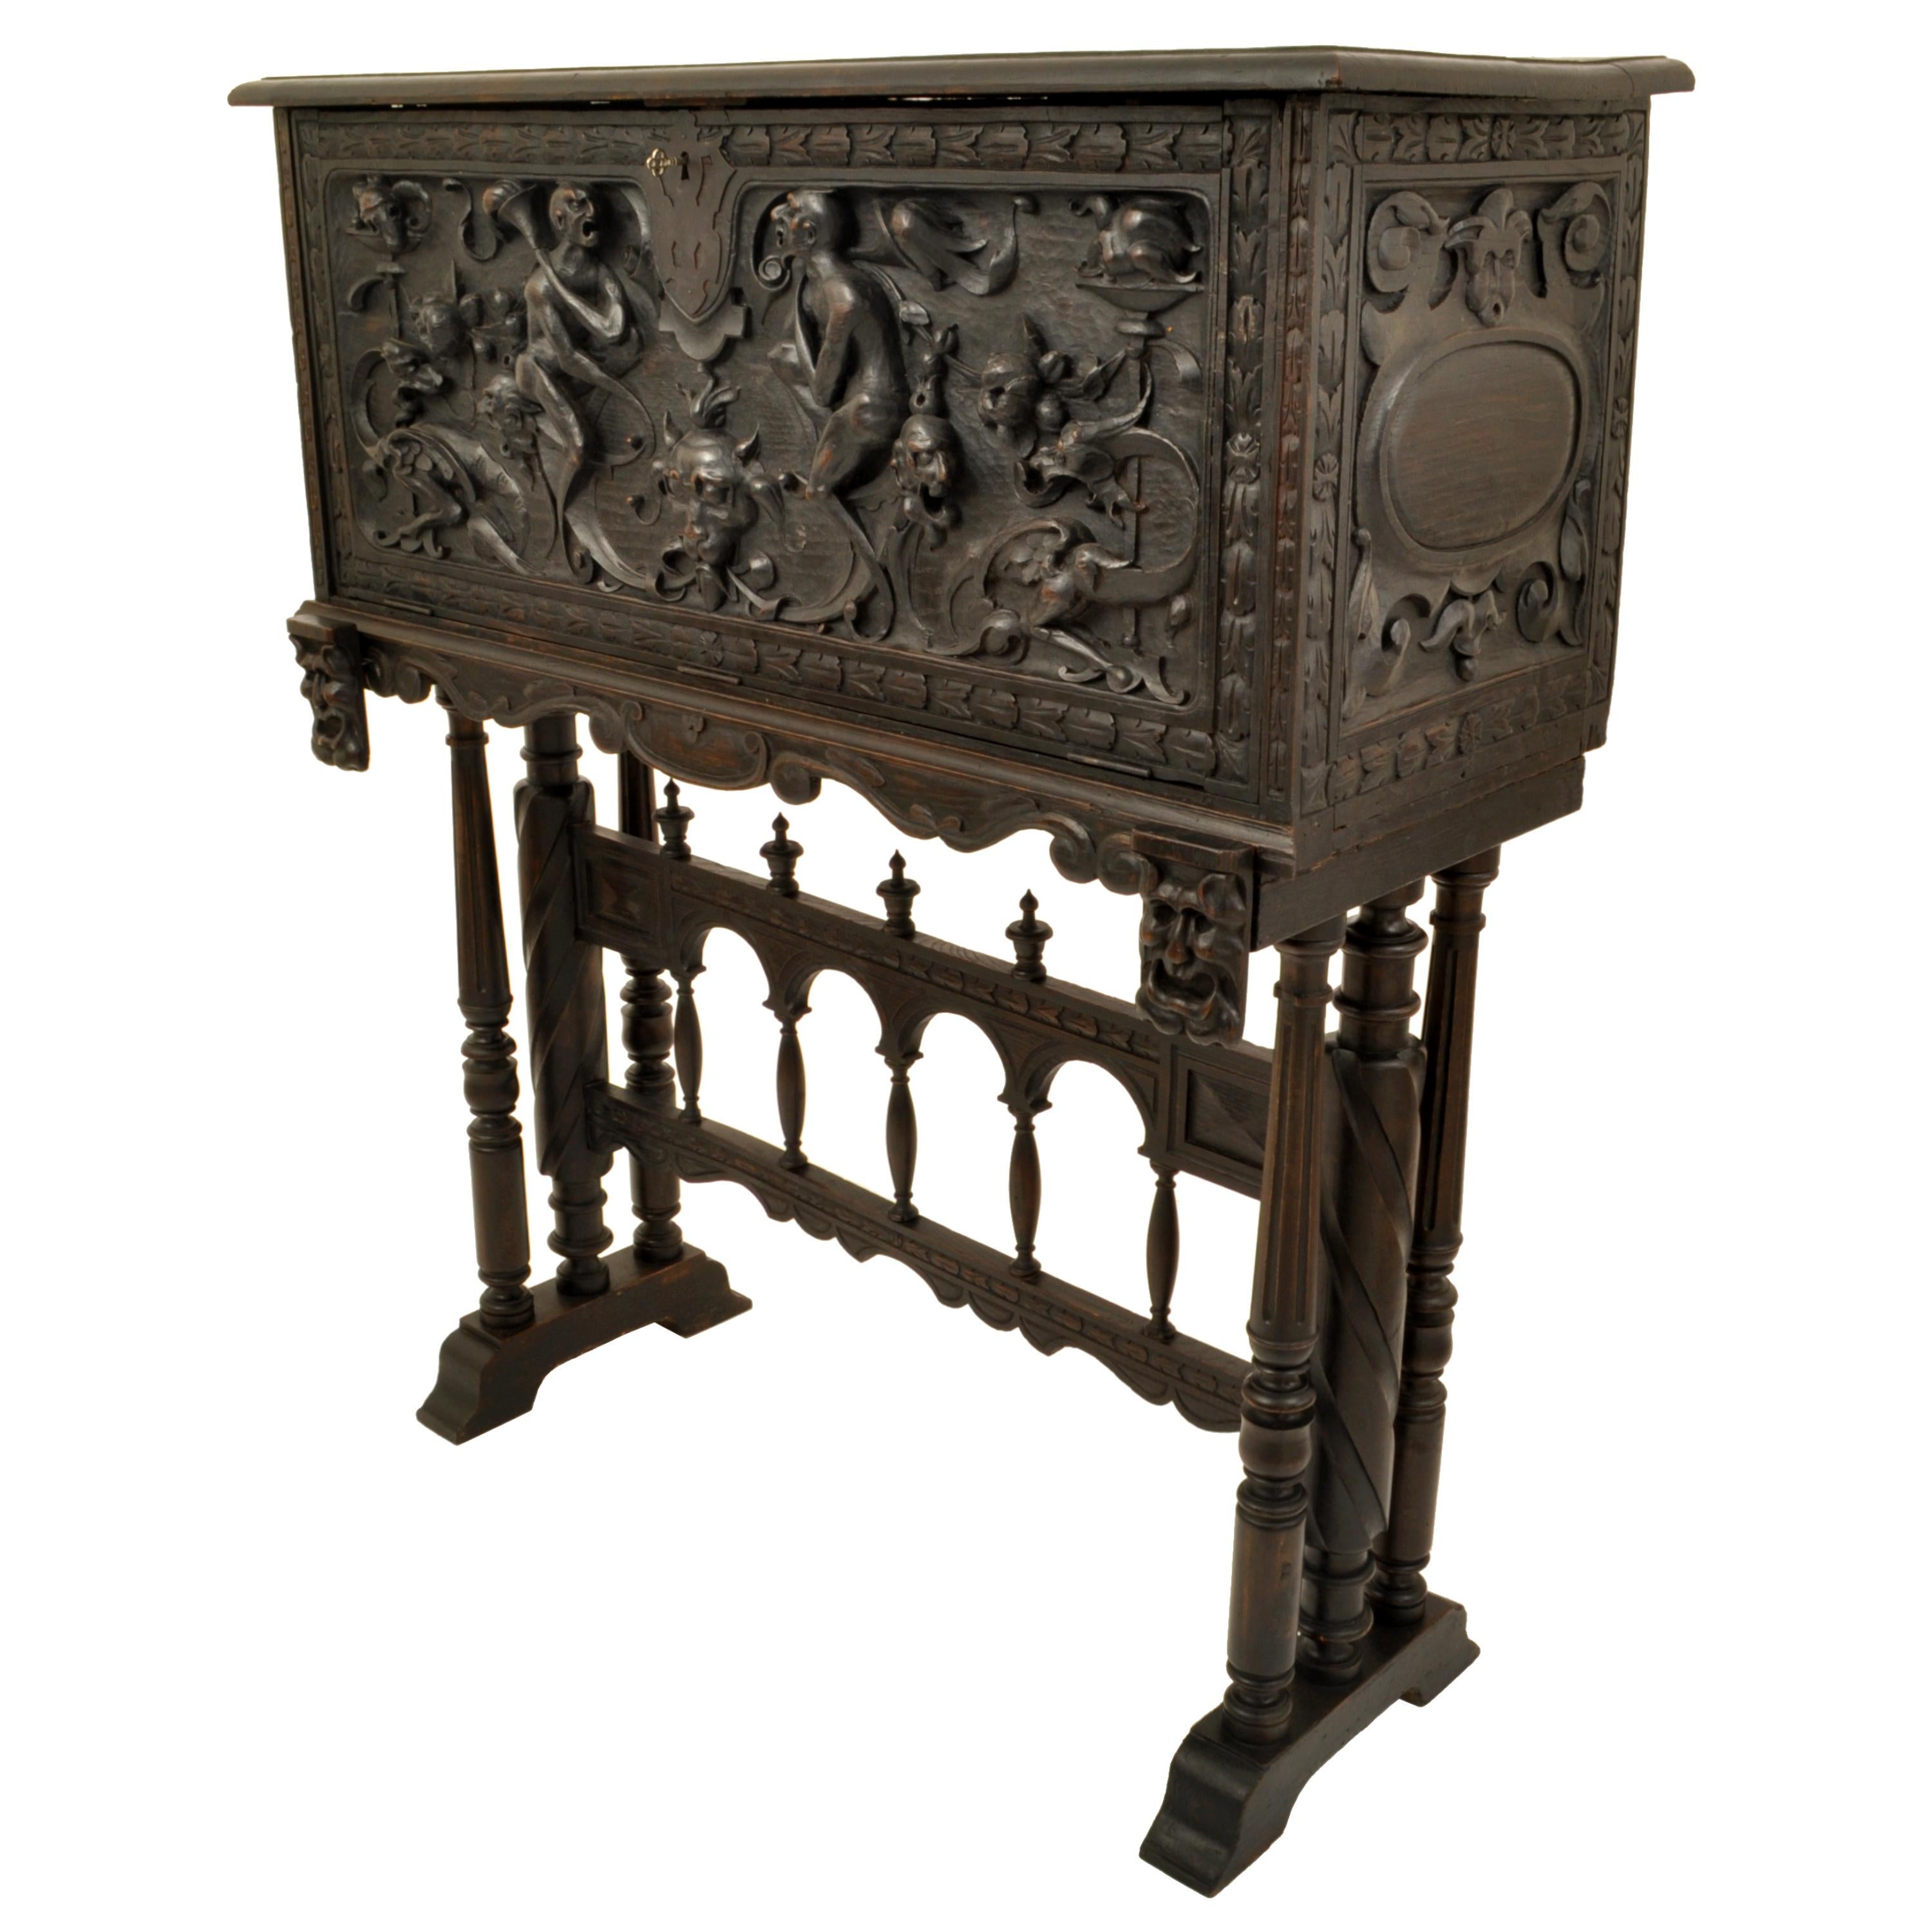 An unusual antique 19th century Spanish Baroque carved vargueno, cabinet on stand circa 1880.
The two section desk and stand is finely carved with baroque grotesques carrying torches, with mythical beasts including a pair of griffins. The desk